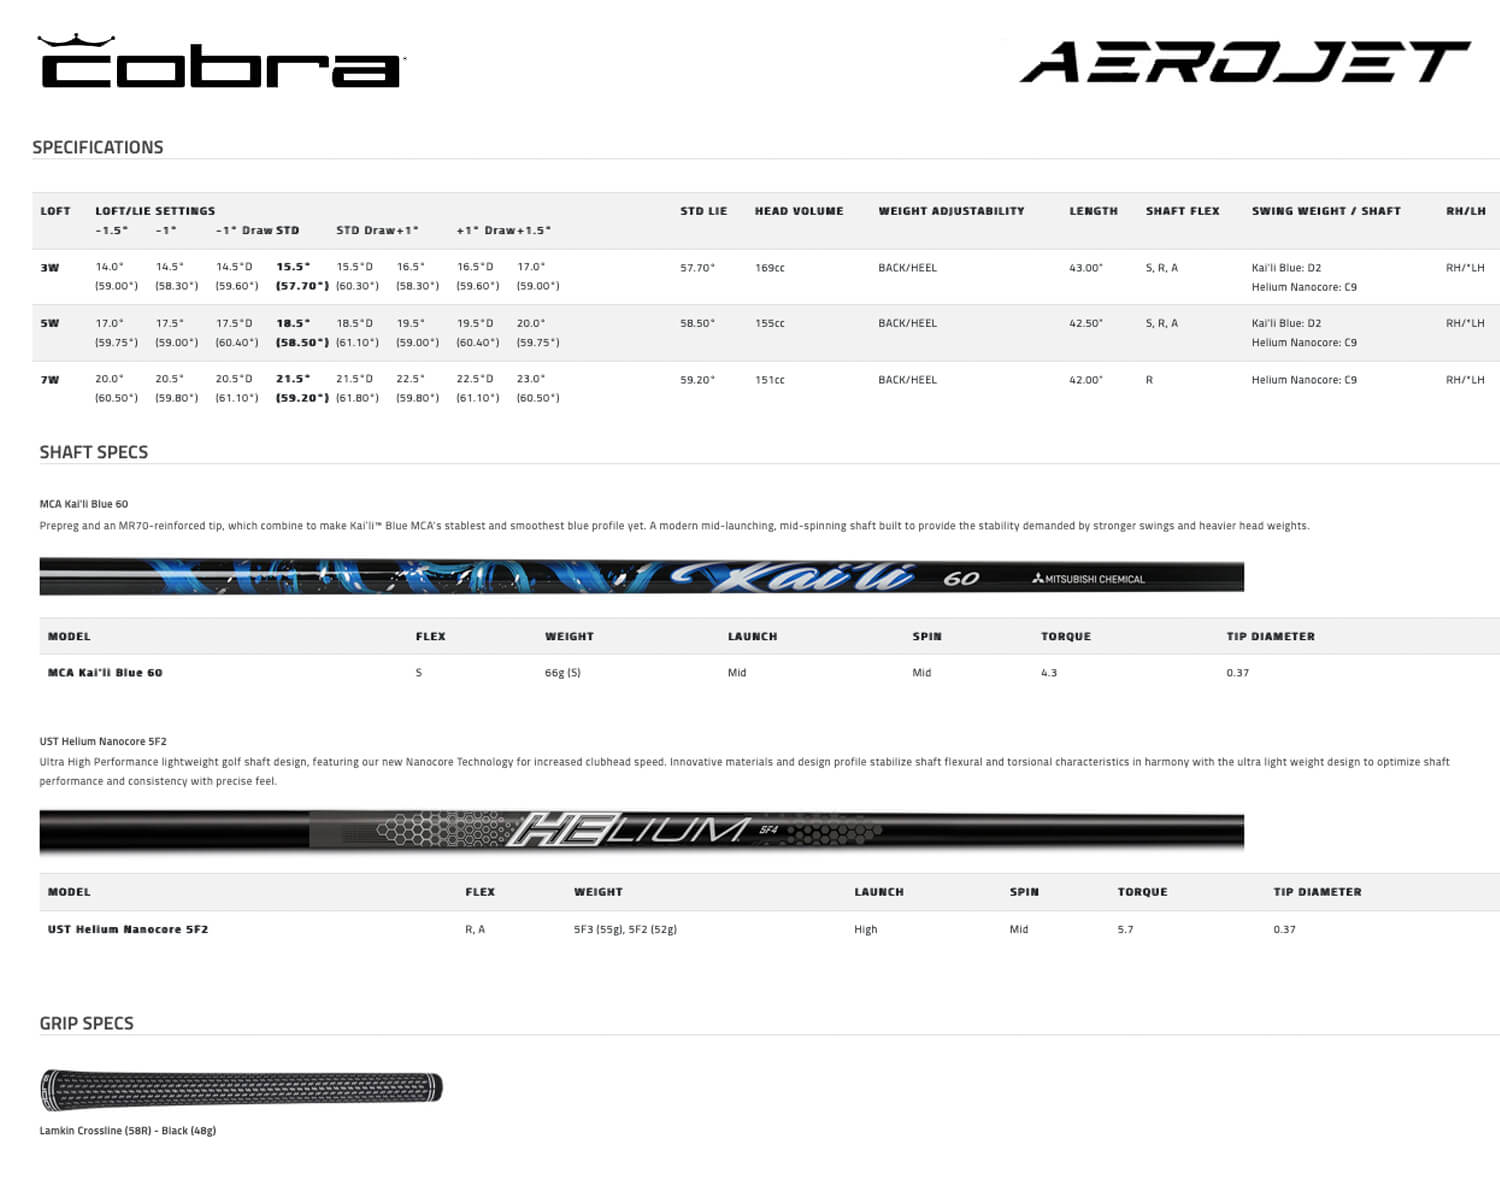 Specification for Cobra Aerojet Max Golf Fairway Woods